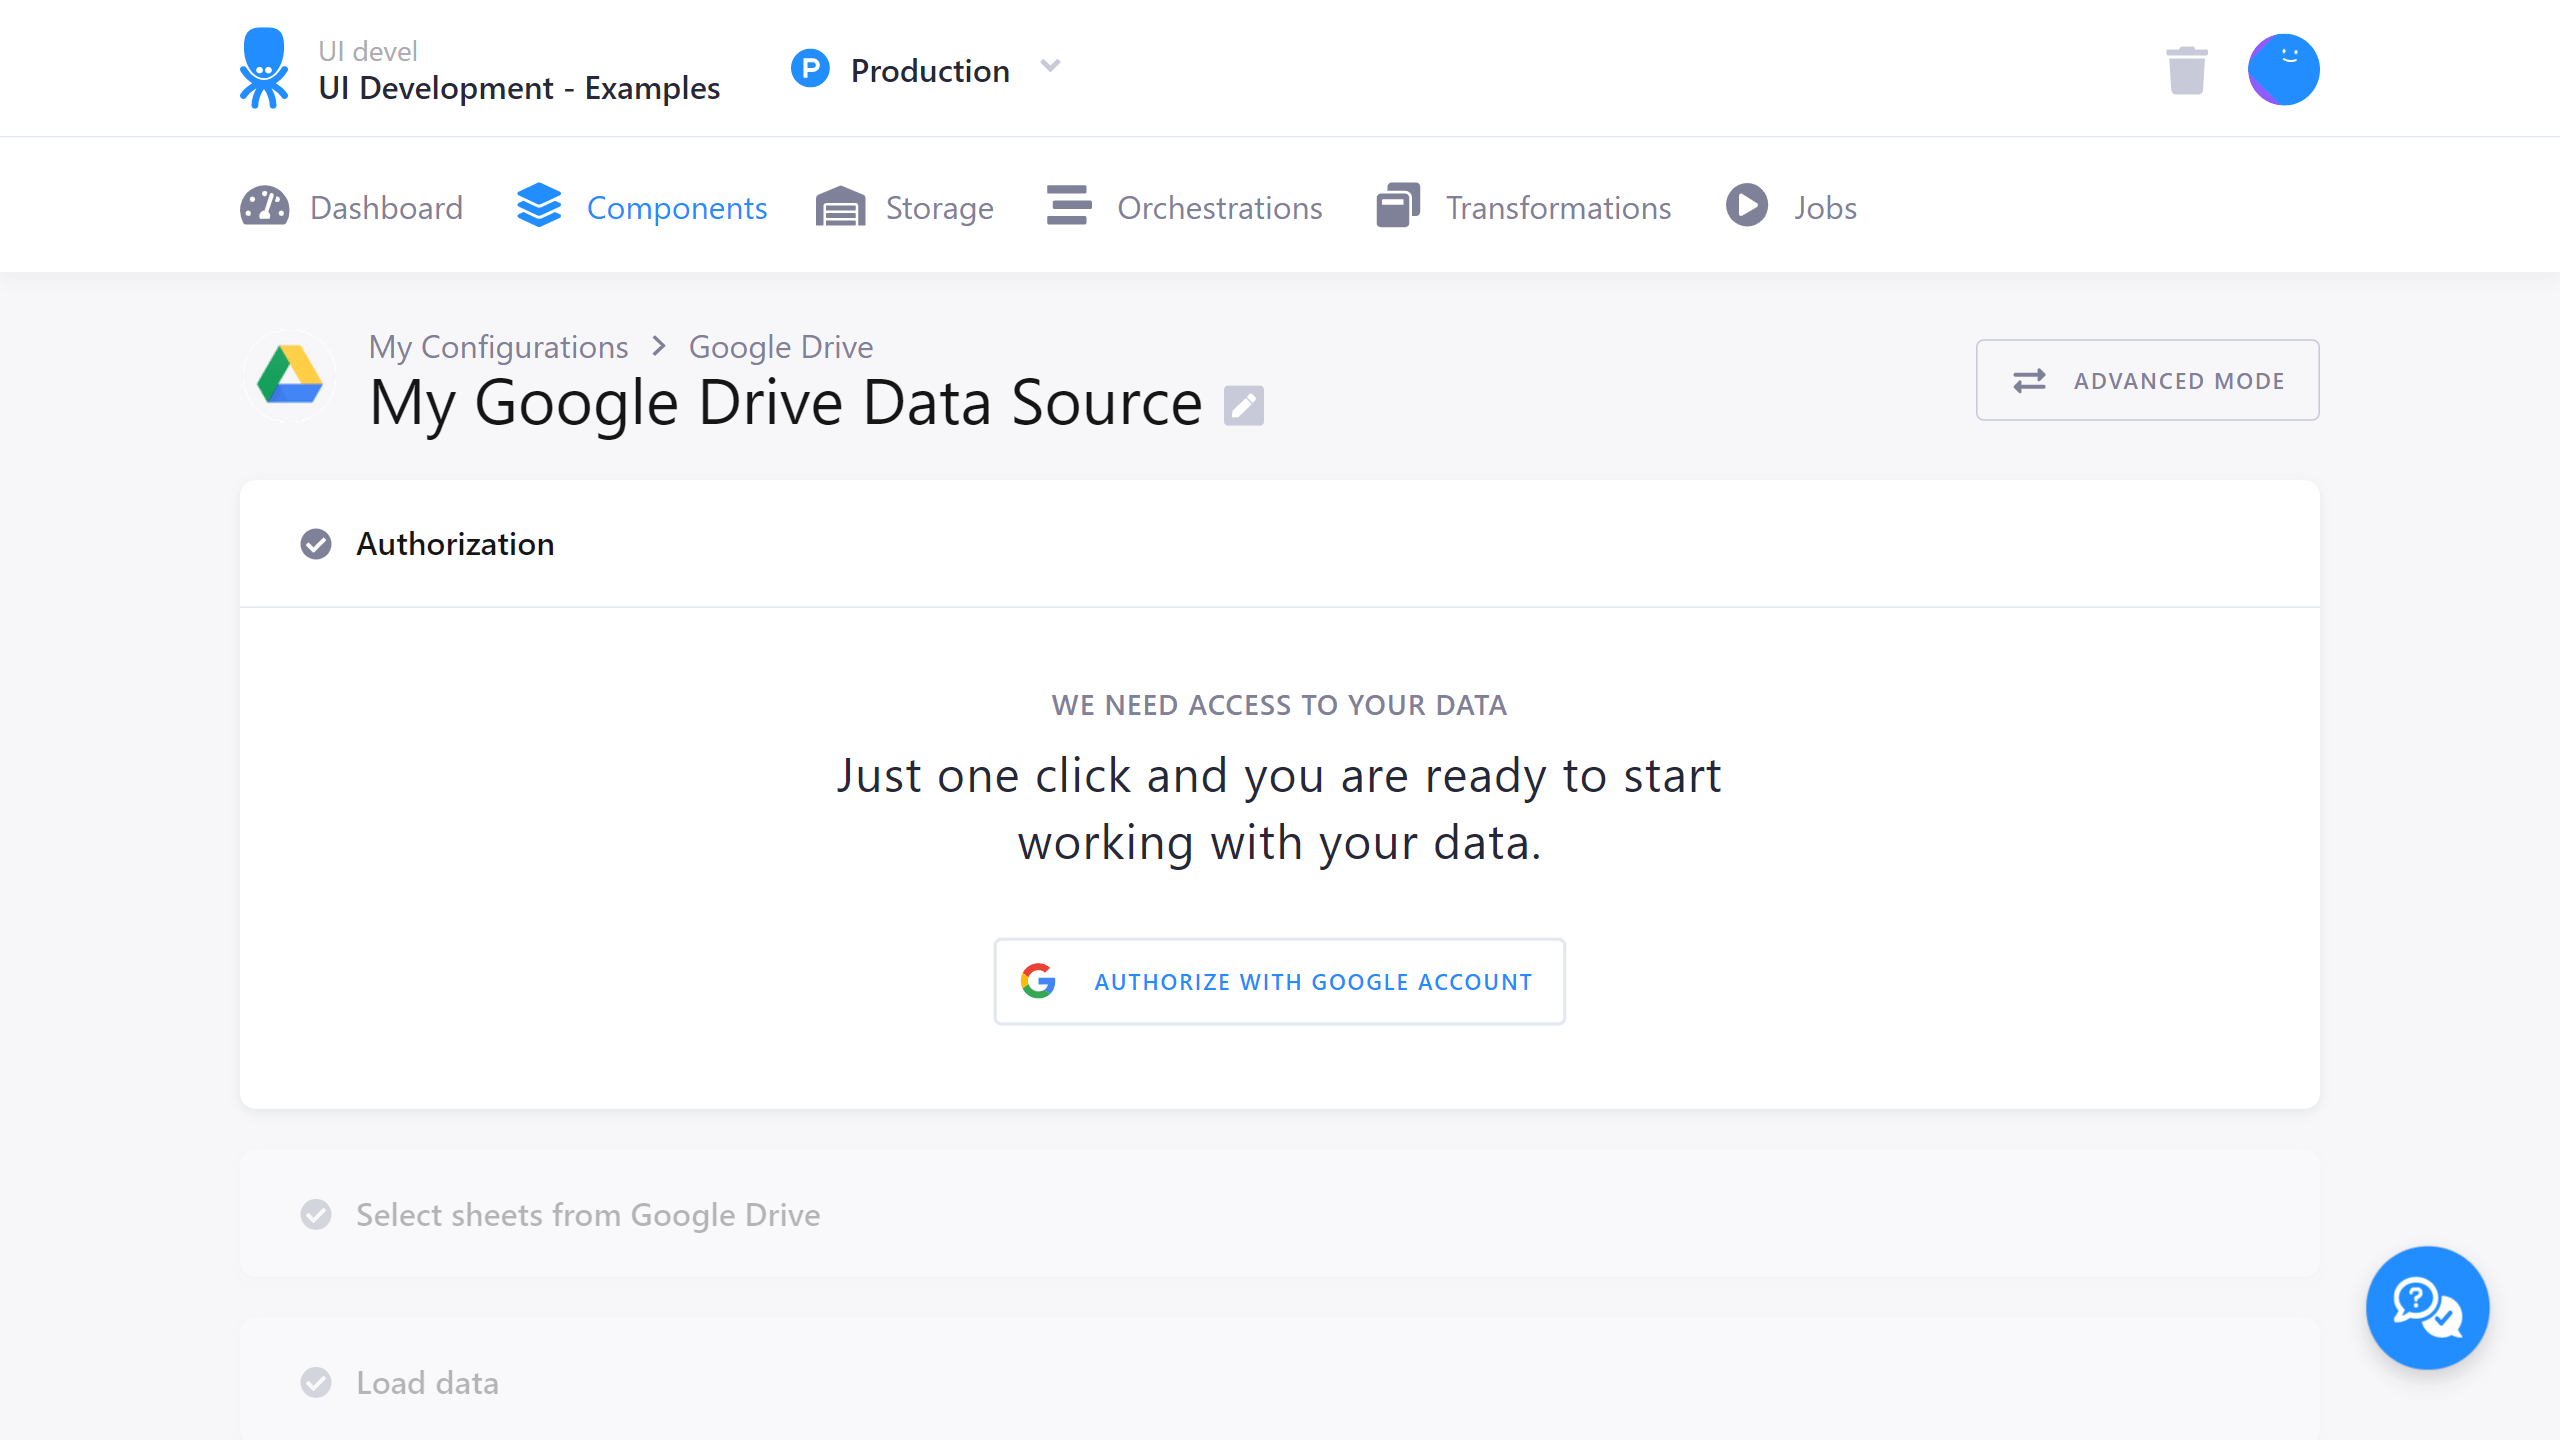 A Simplified UI for Most Common Data Source Components